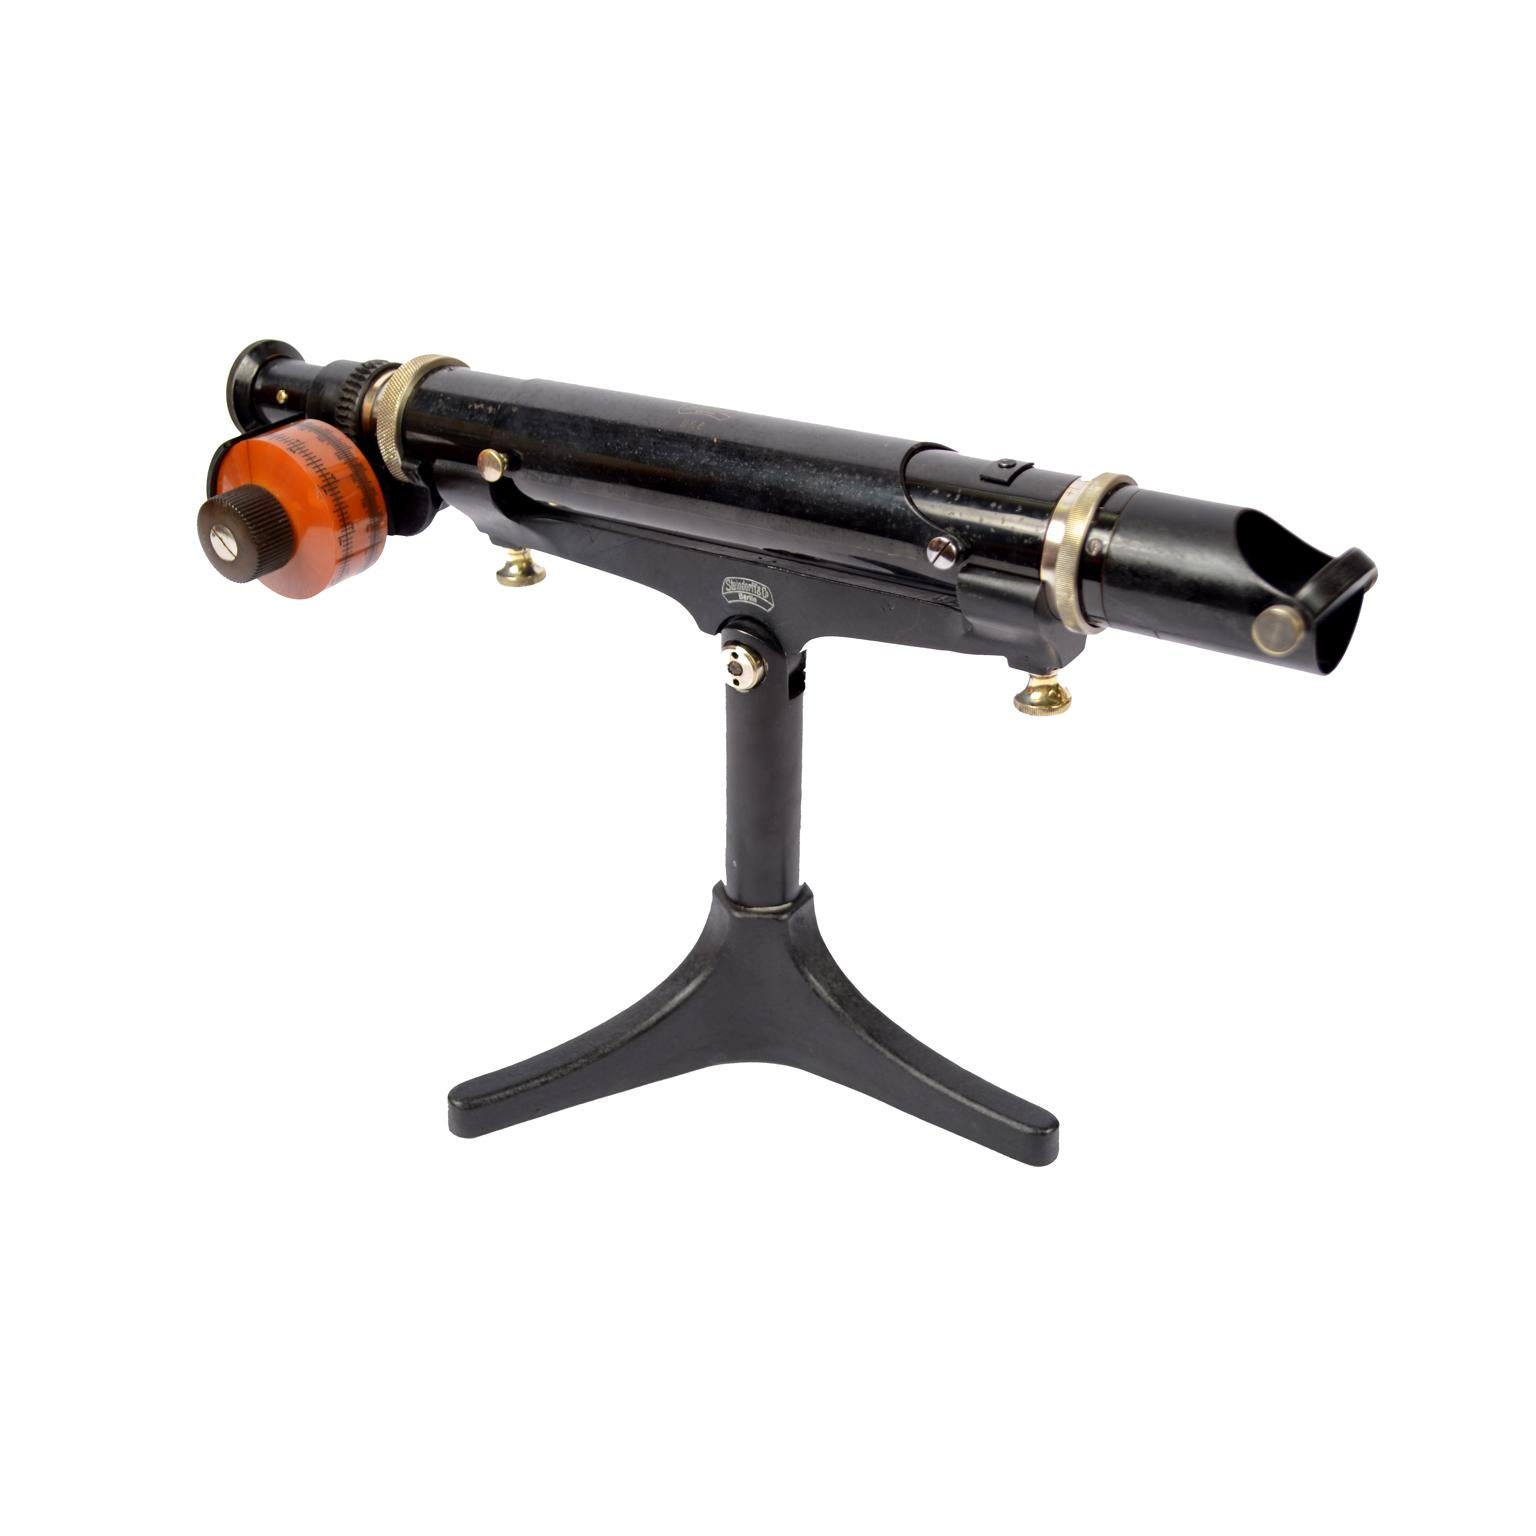 Refractor polarimeter made of painted brass with cast iron tripod base by Steindorff & Co. Berlin D.R.P. Germany, 1920s. It is an antique instrument used to determine the concentration of sucrose and glucose in raw materials and food products based